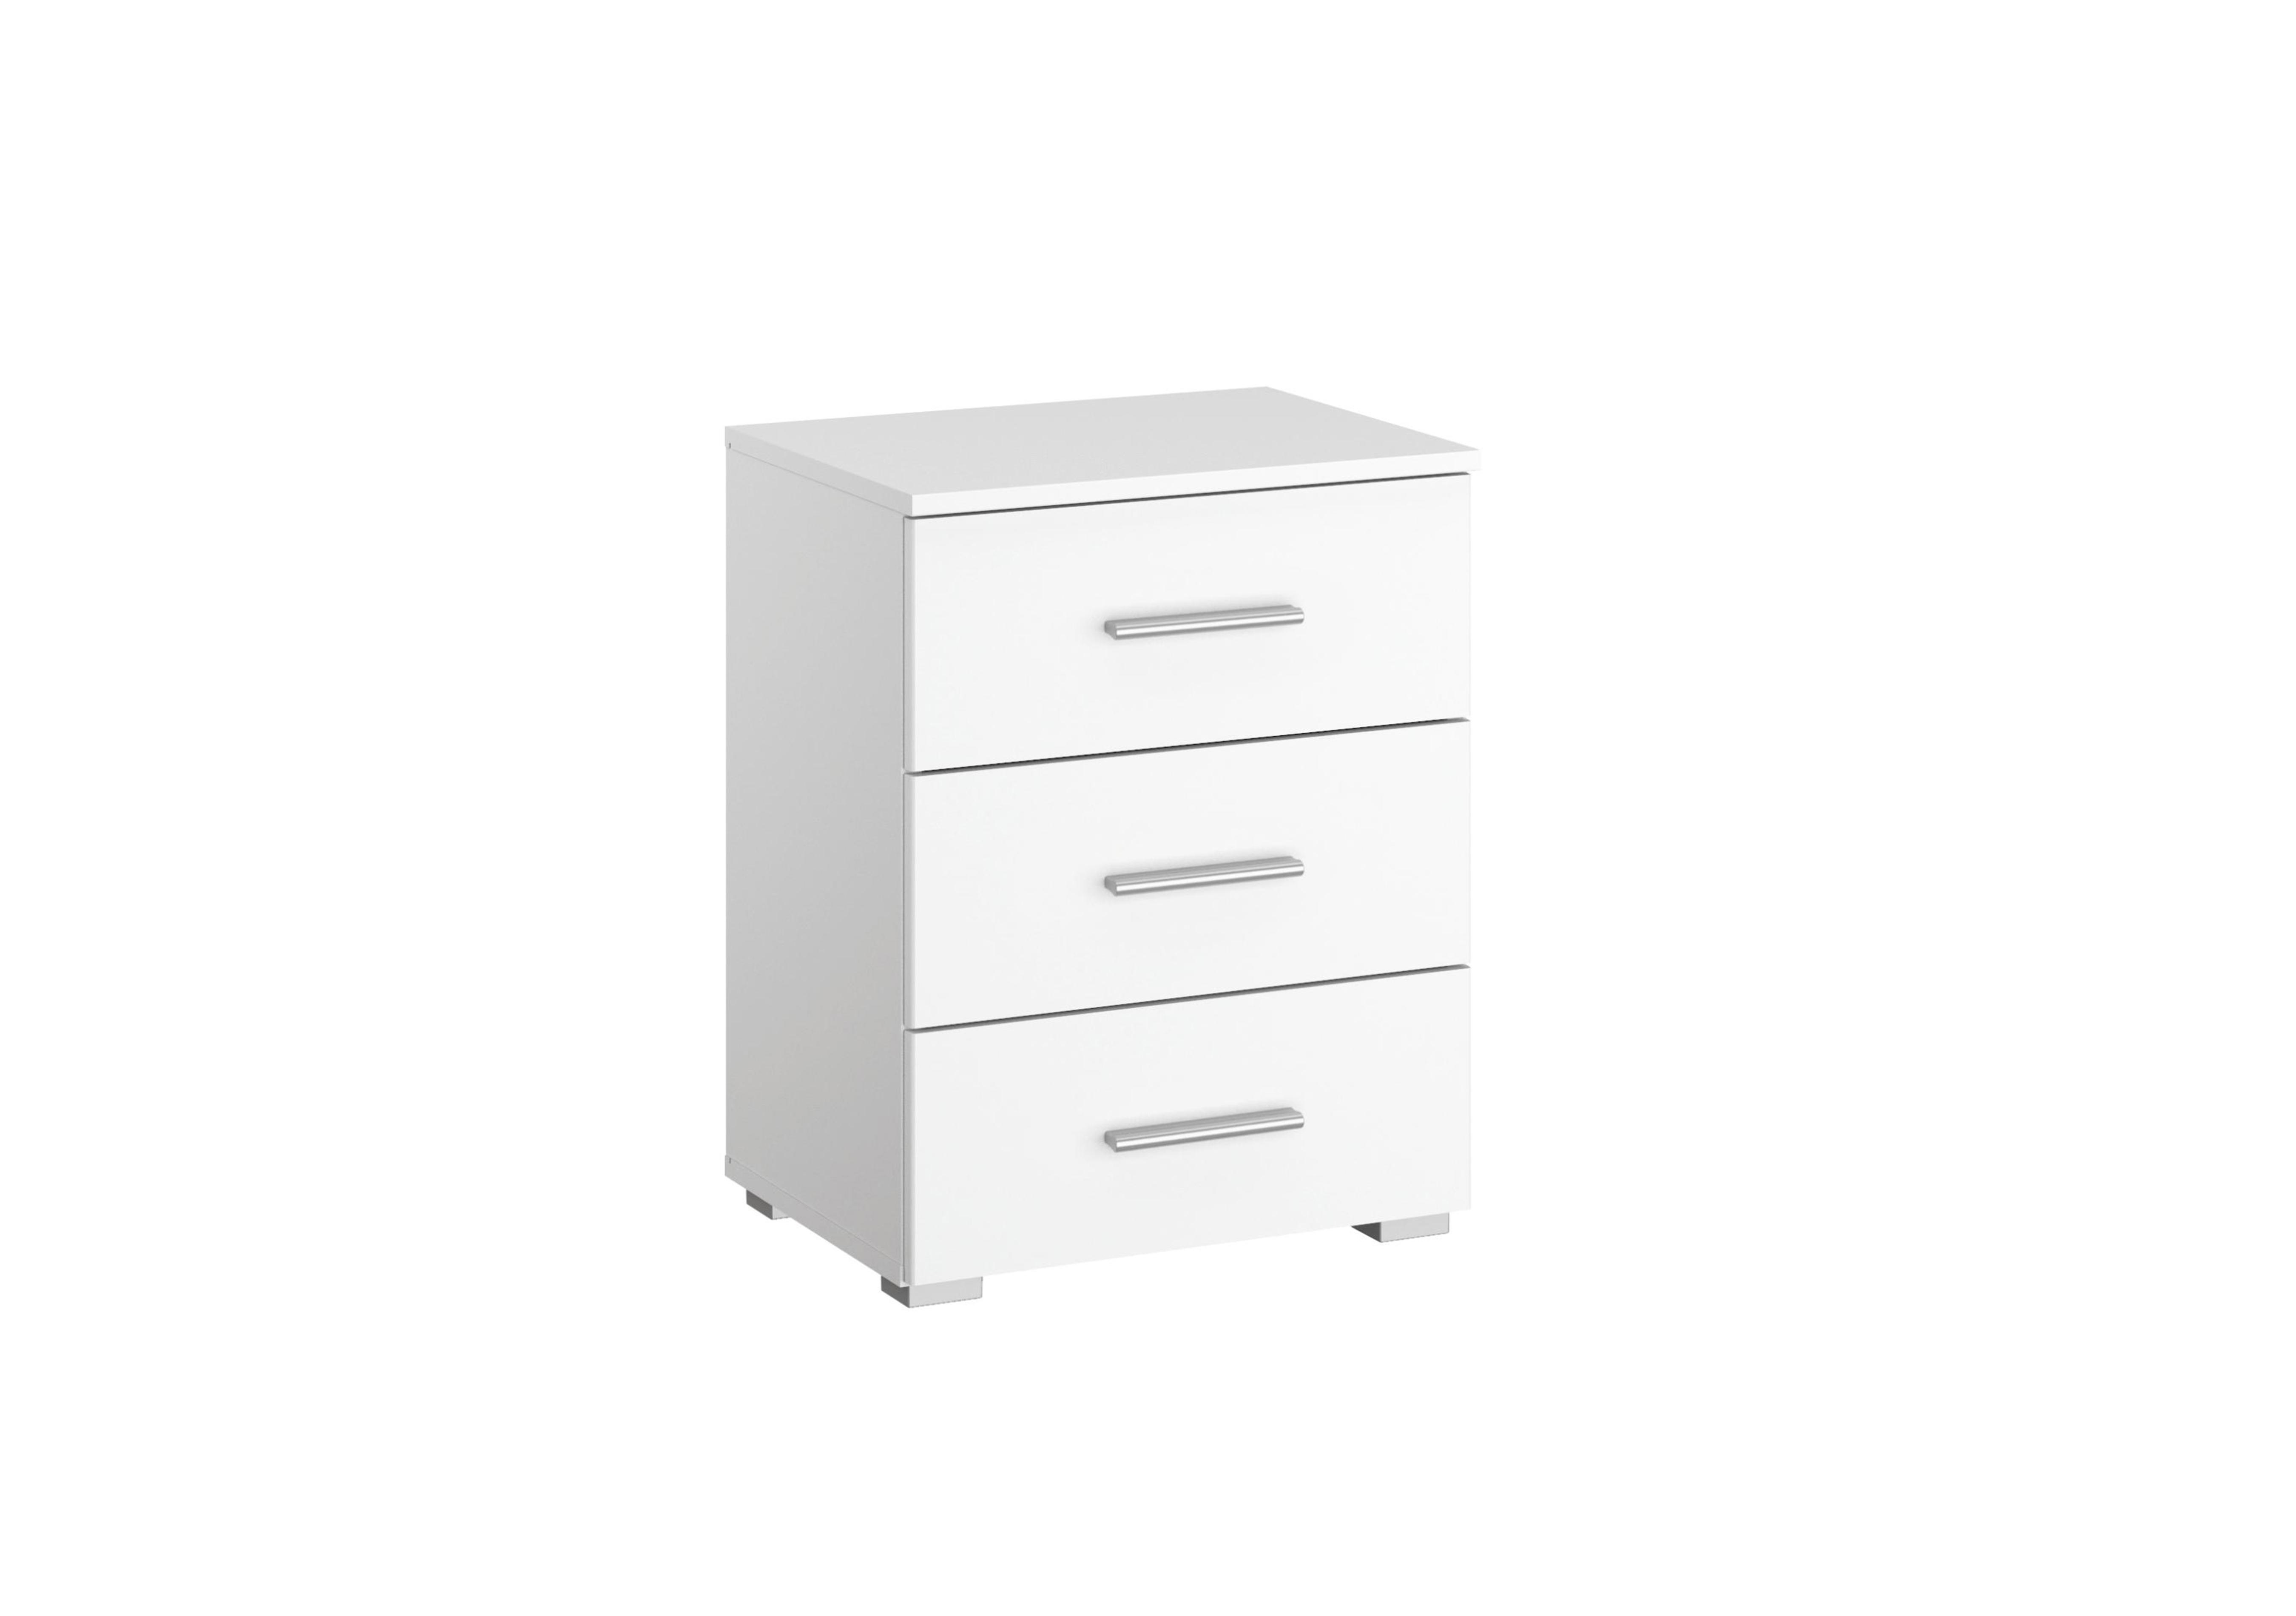 Solo 3 Drawer Bedside Chest in Ar949 Alpine White on Furniture Village